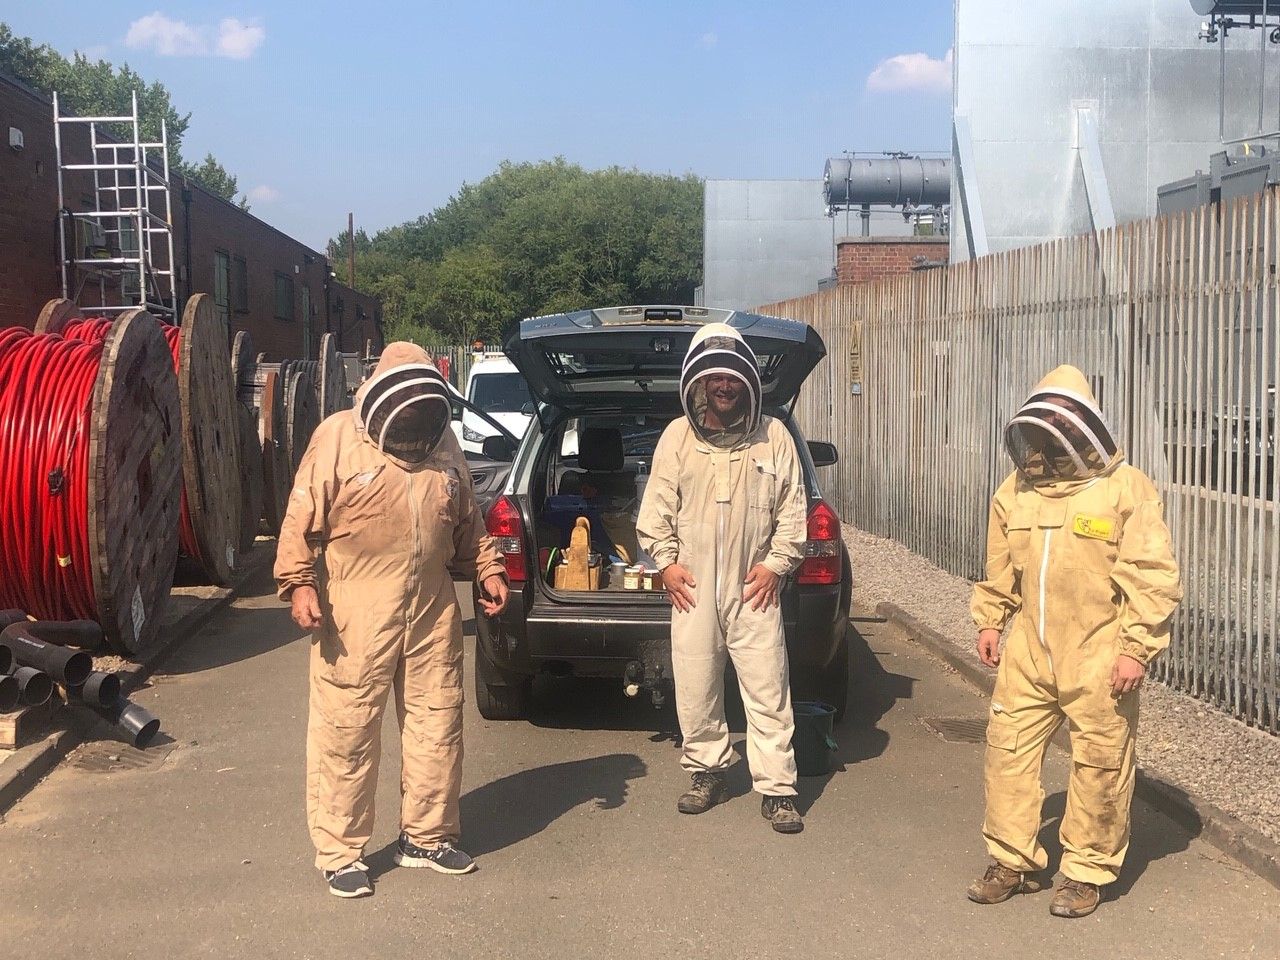 Substation with engineers in beekeeper outfits